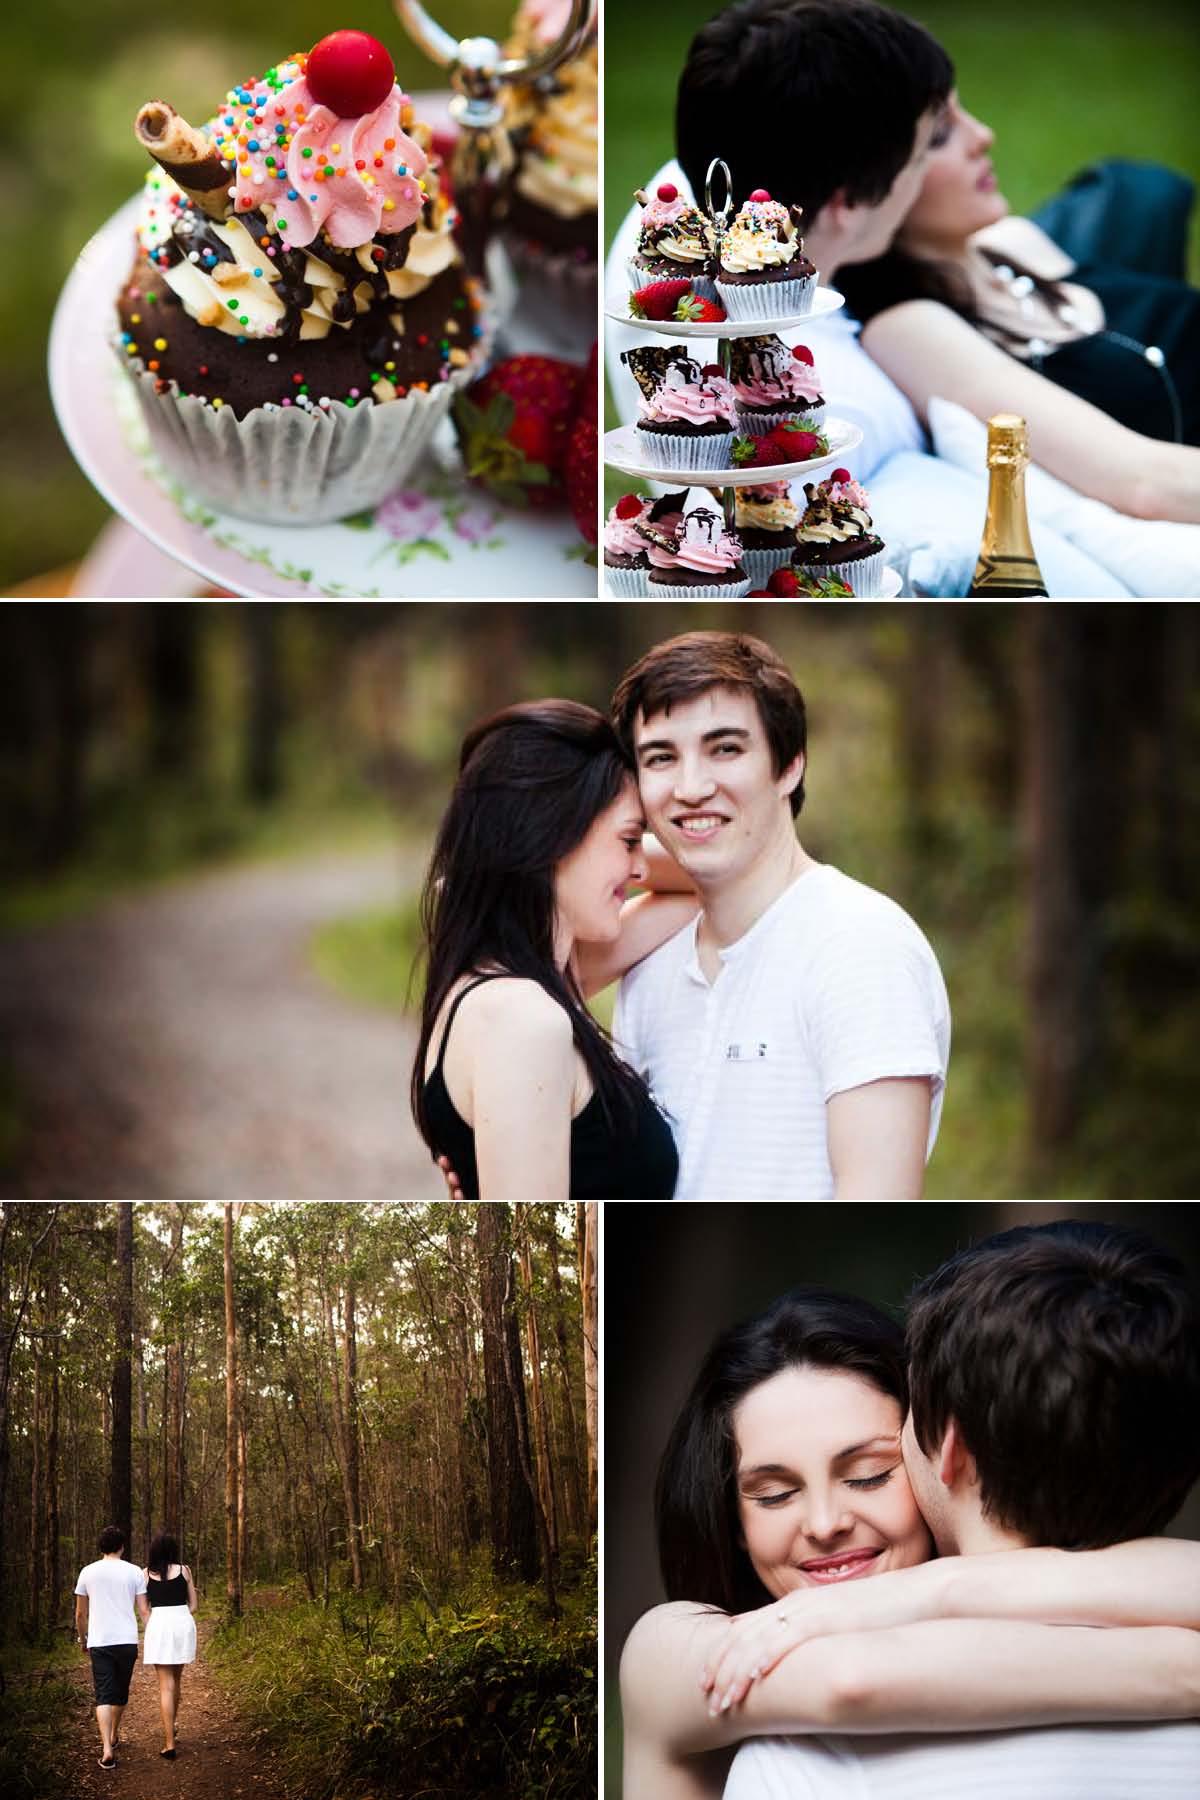 Engagement shoot with cupcakes